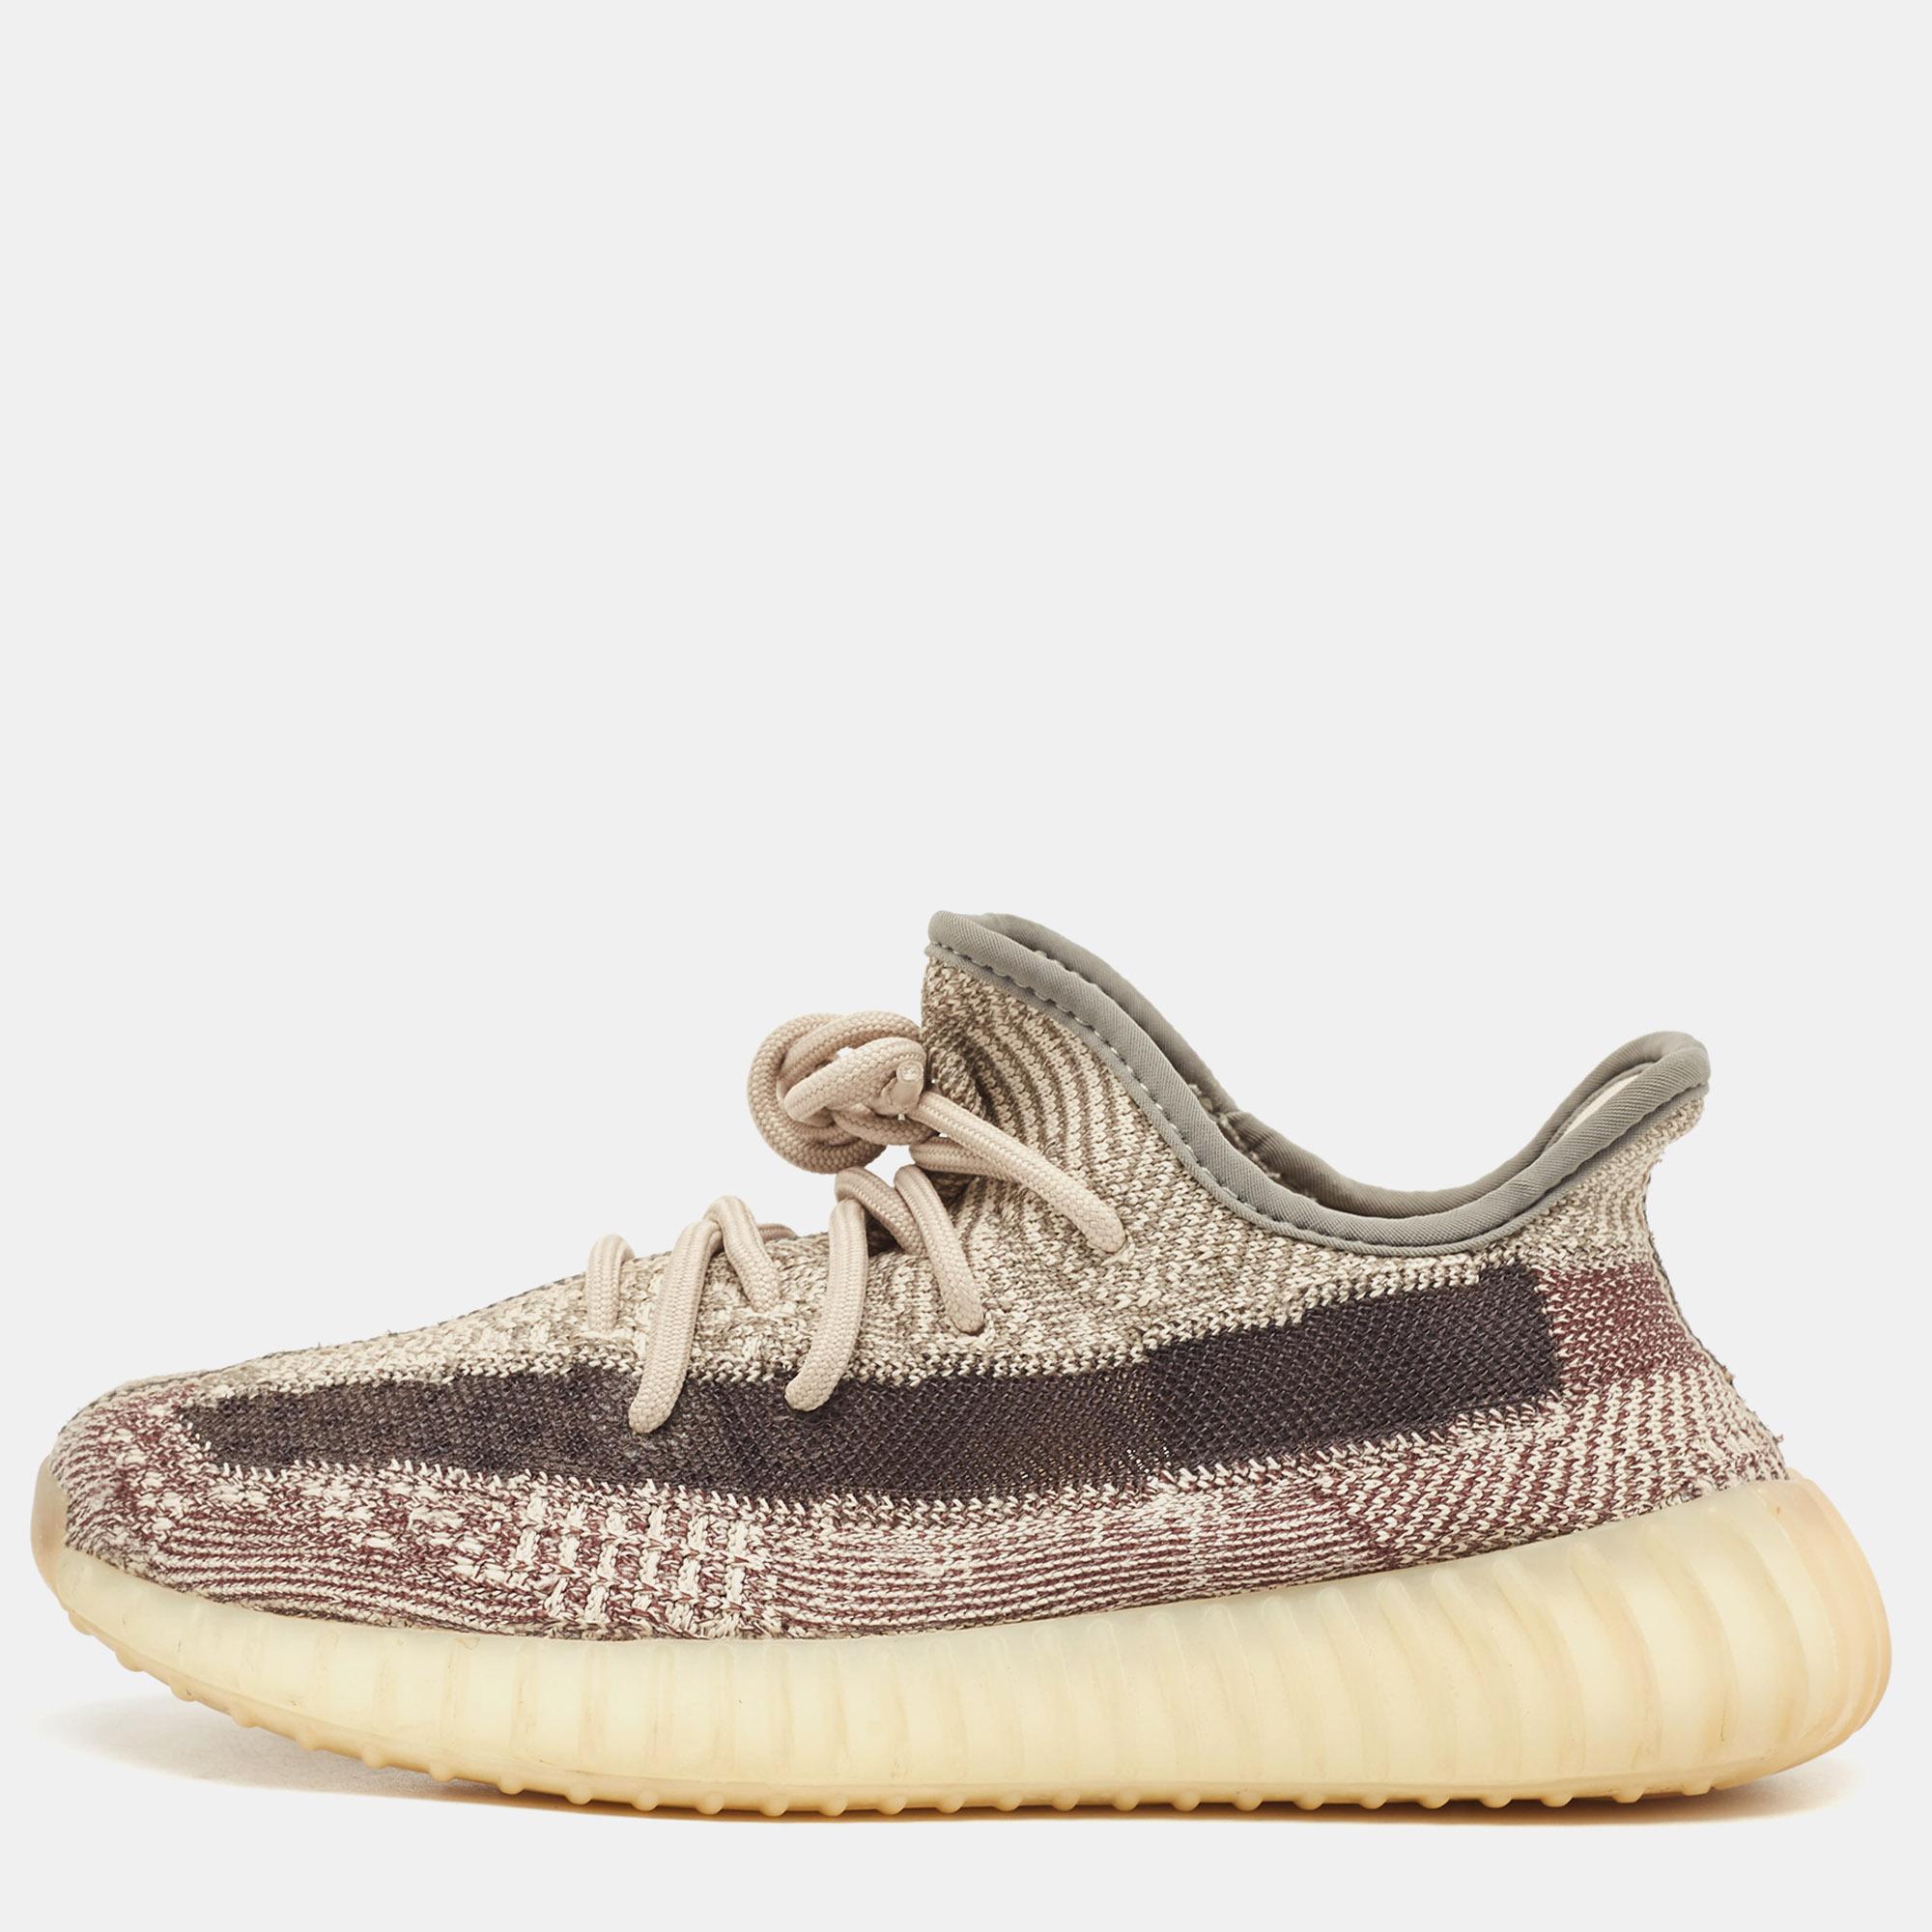 

Yeezy x Adidas Brown/Beige Knit Fabric Boost 350 V2 Zyon Sneakers Size 38 1/3